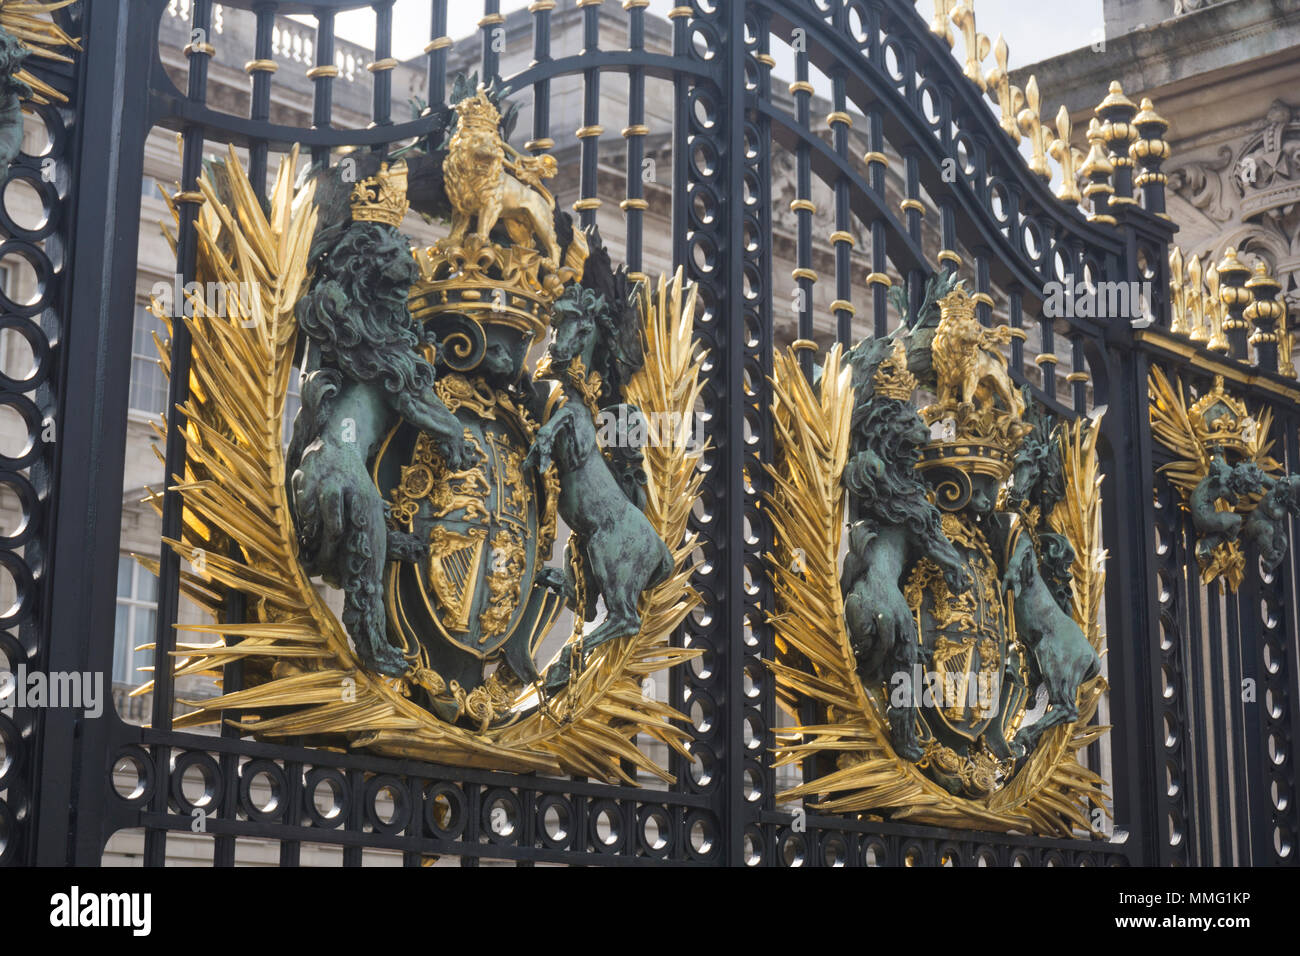 LONDON, UK - MAY 11th 2018: The main gate at Buckingham Palace with ornate coat of arms Stock Photo